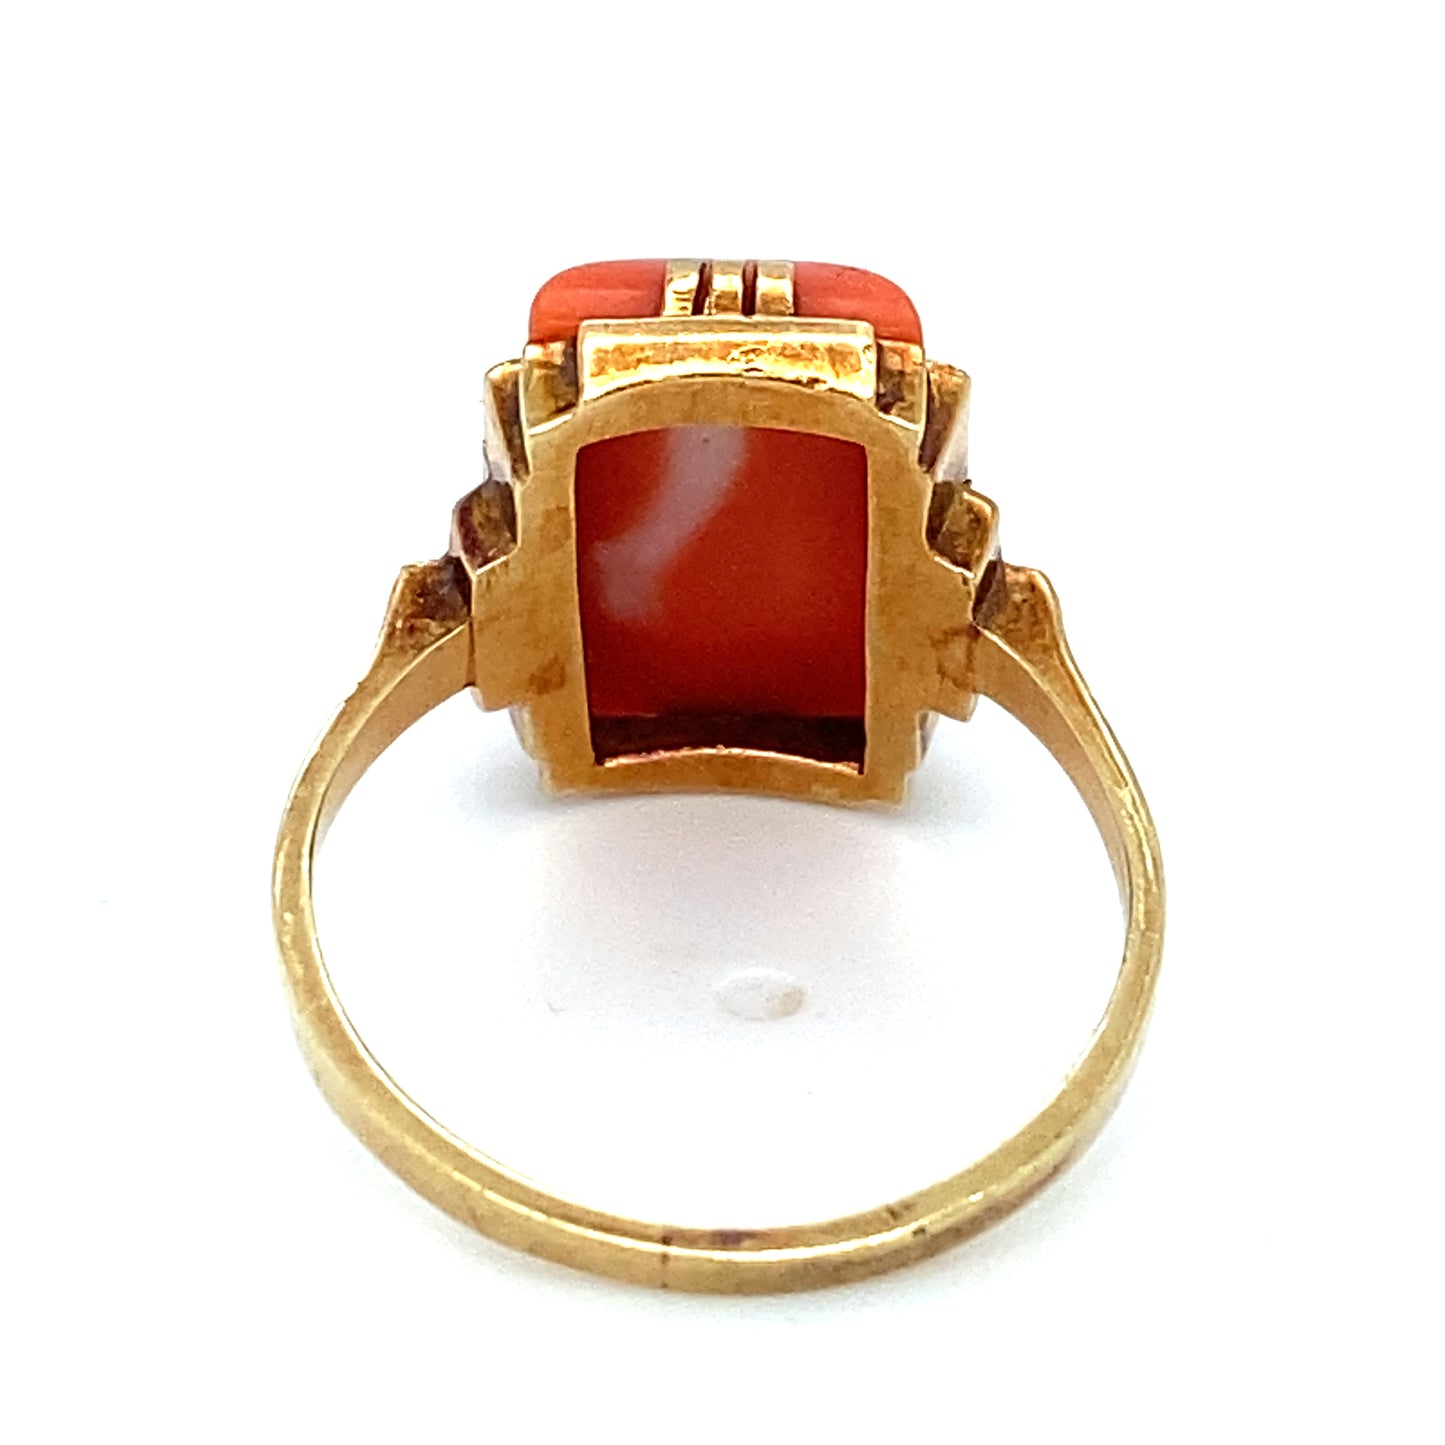 Circa 1940s Art Deco Style Rectangular Coral Ring in 14K Gold